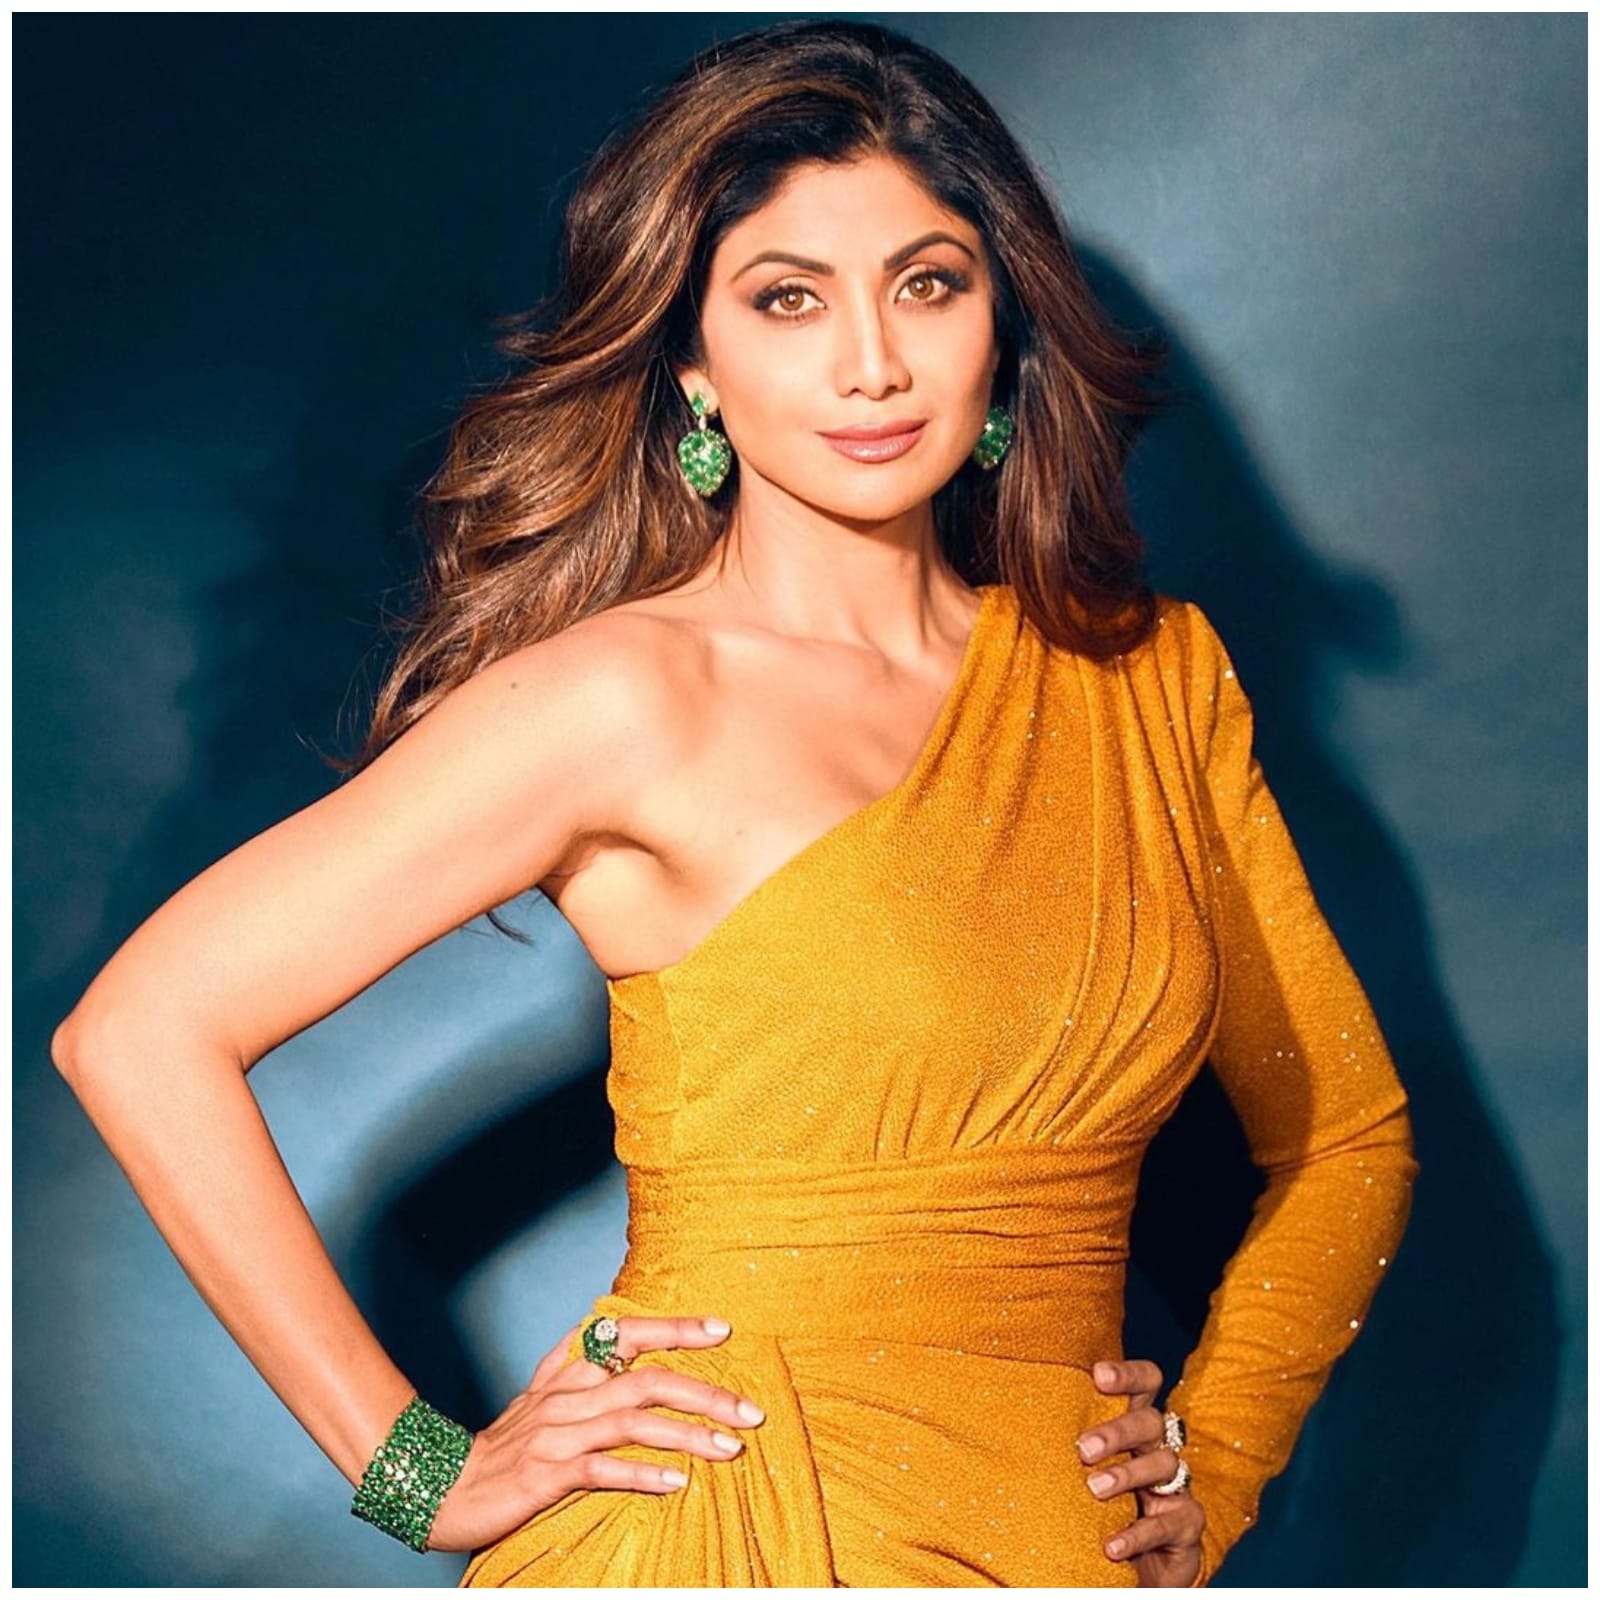 Bollywood Rallies Behind Shilpa Shetty as She Breaks Silence on Raj Kundra  Case, Requests for Privacy - News18